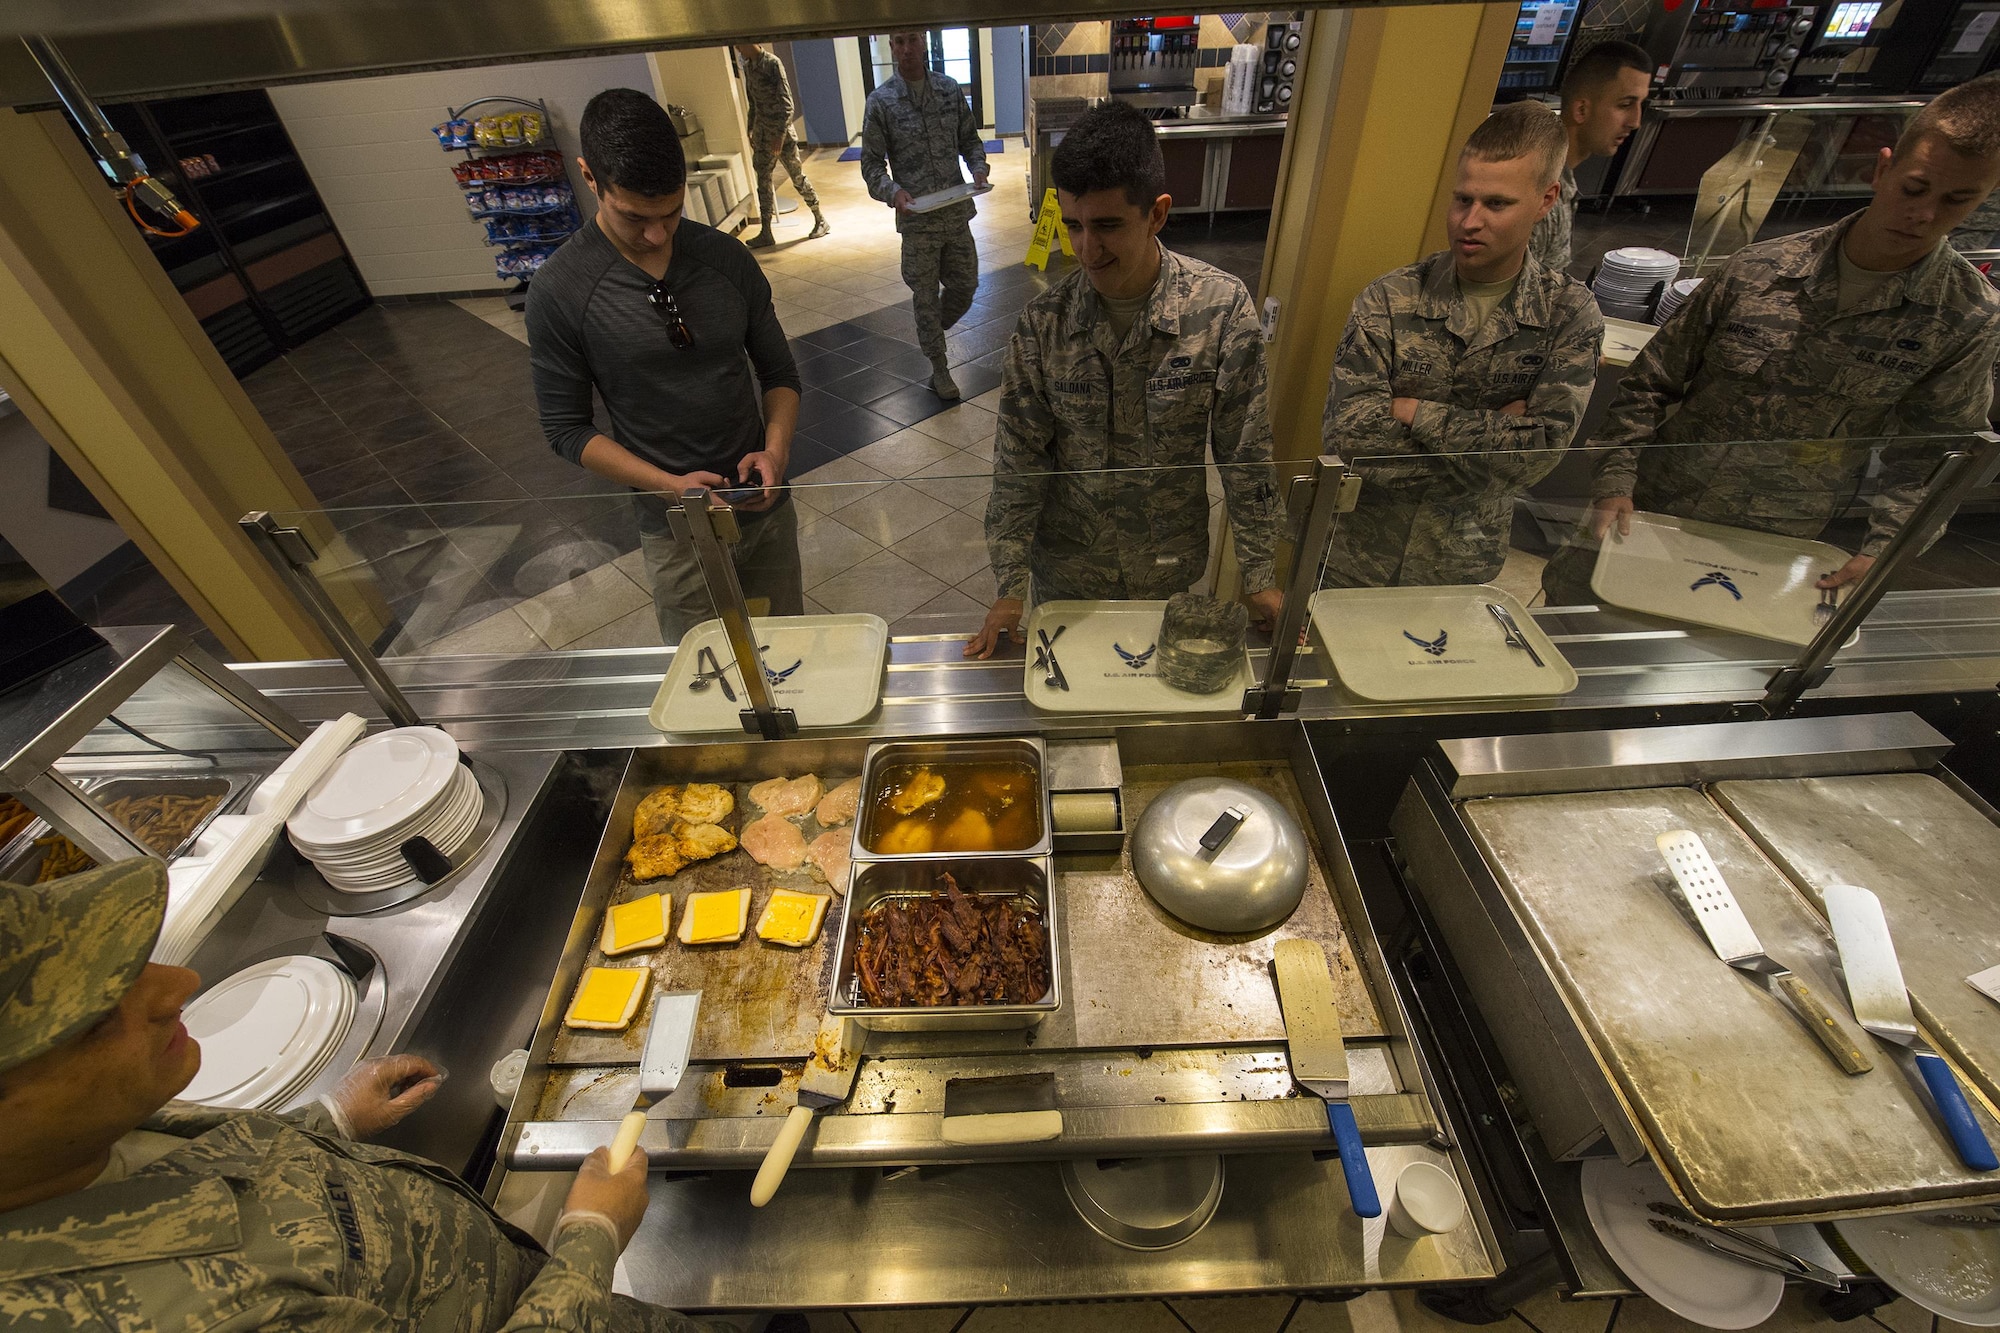 U.S. Air Force Airmen wait in line for their lunch, April 7, 2016, at Moody Air Force Base, Ga. The Georgia Pines Dining Facility offers weekly cultural foods including Mexican, British and Italian style meals. (U.S. Air Force photo by Airman Daniel Snider/Released)